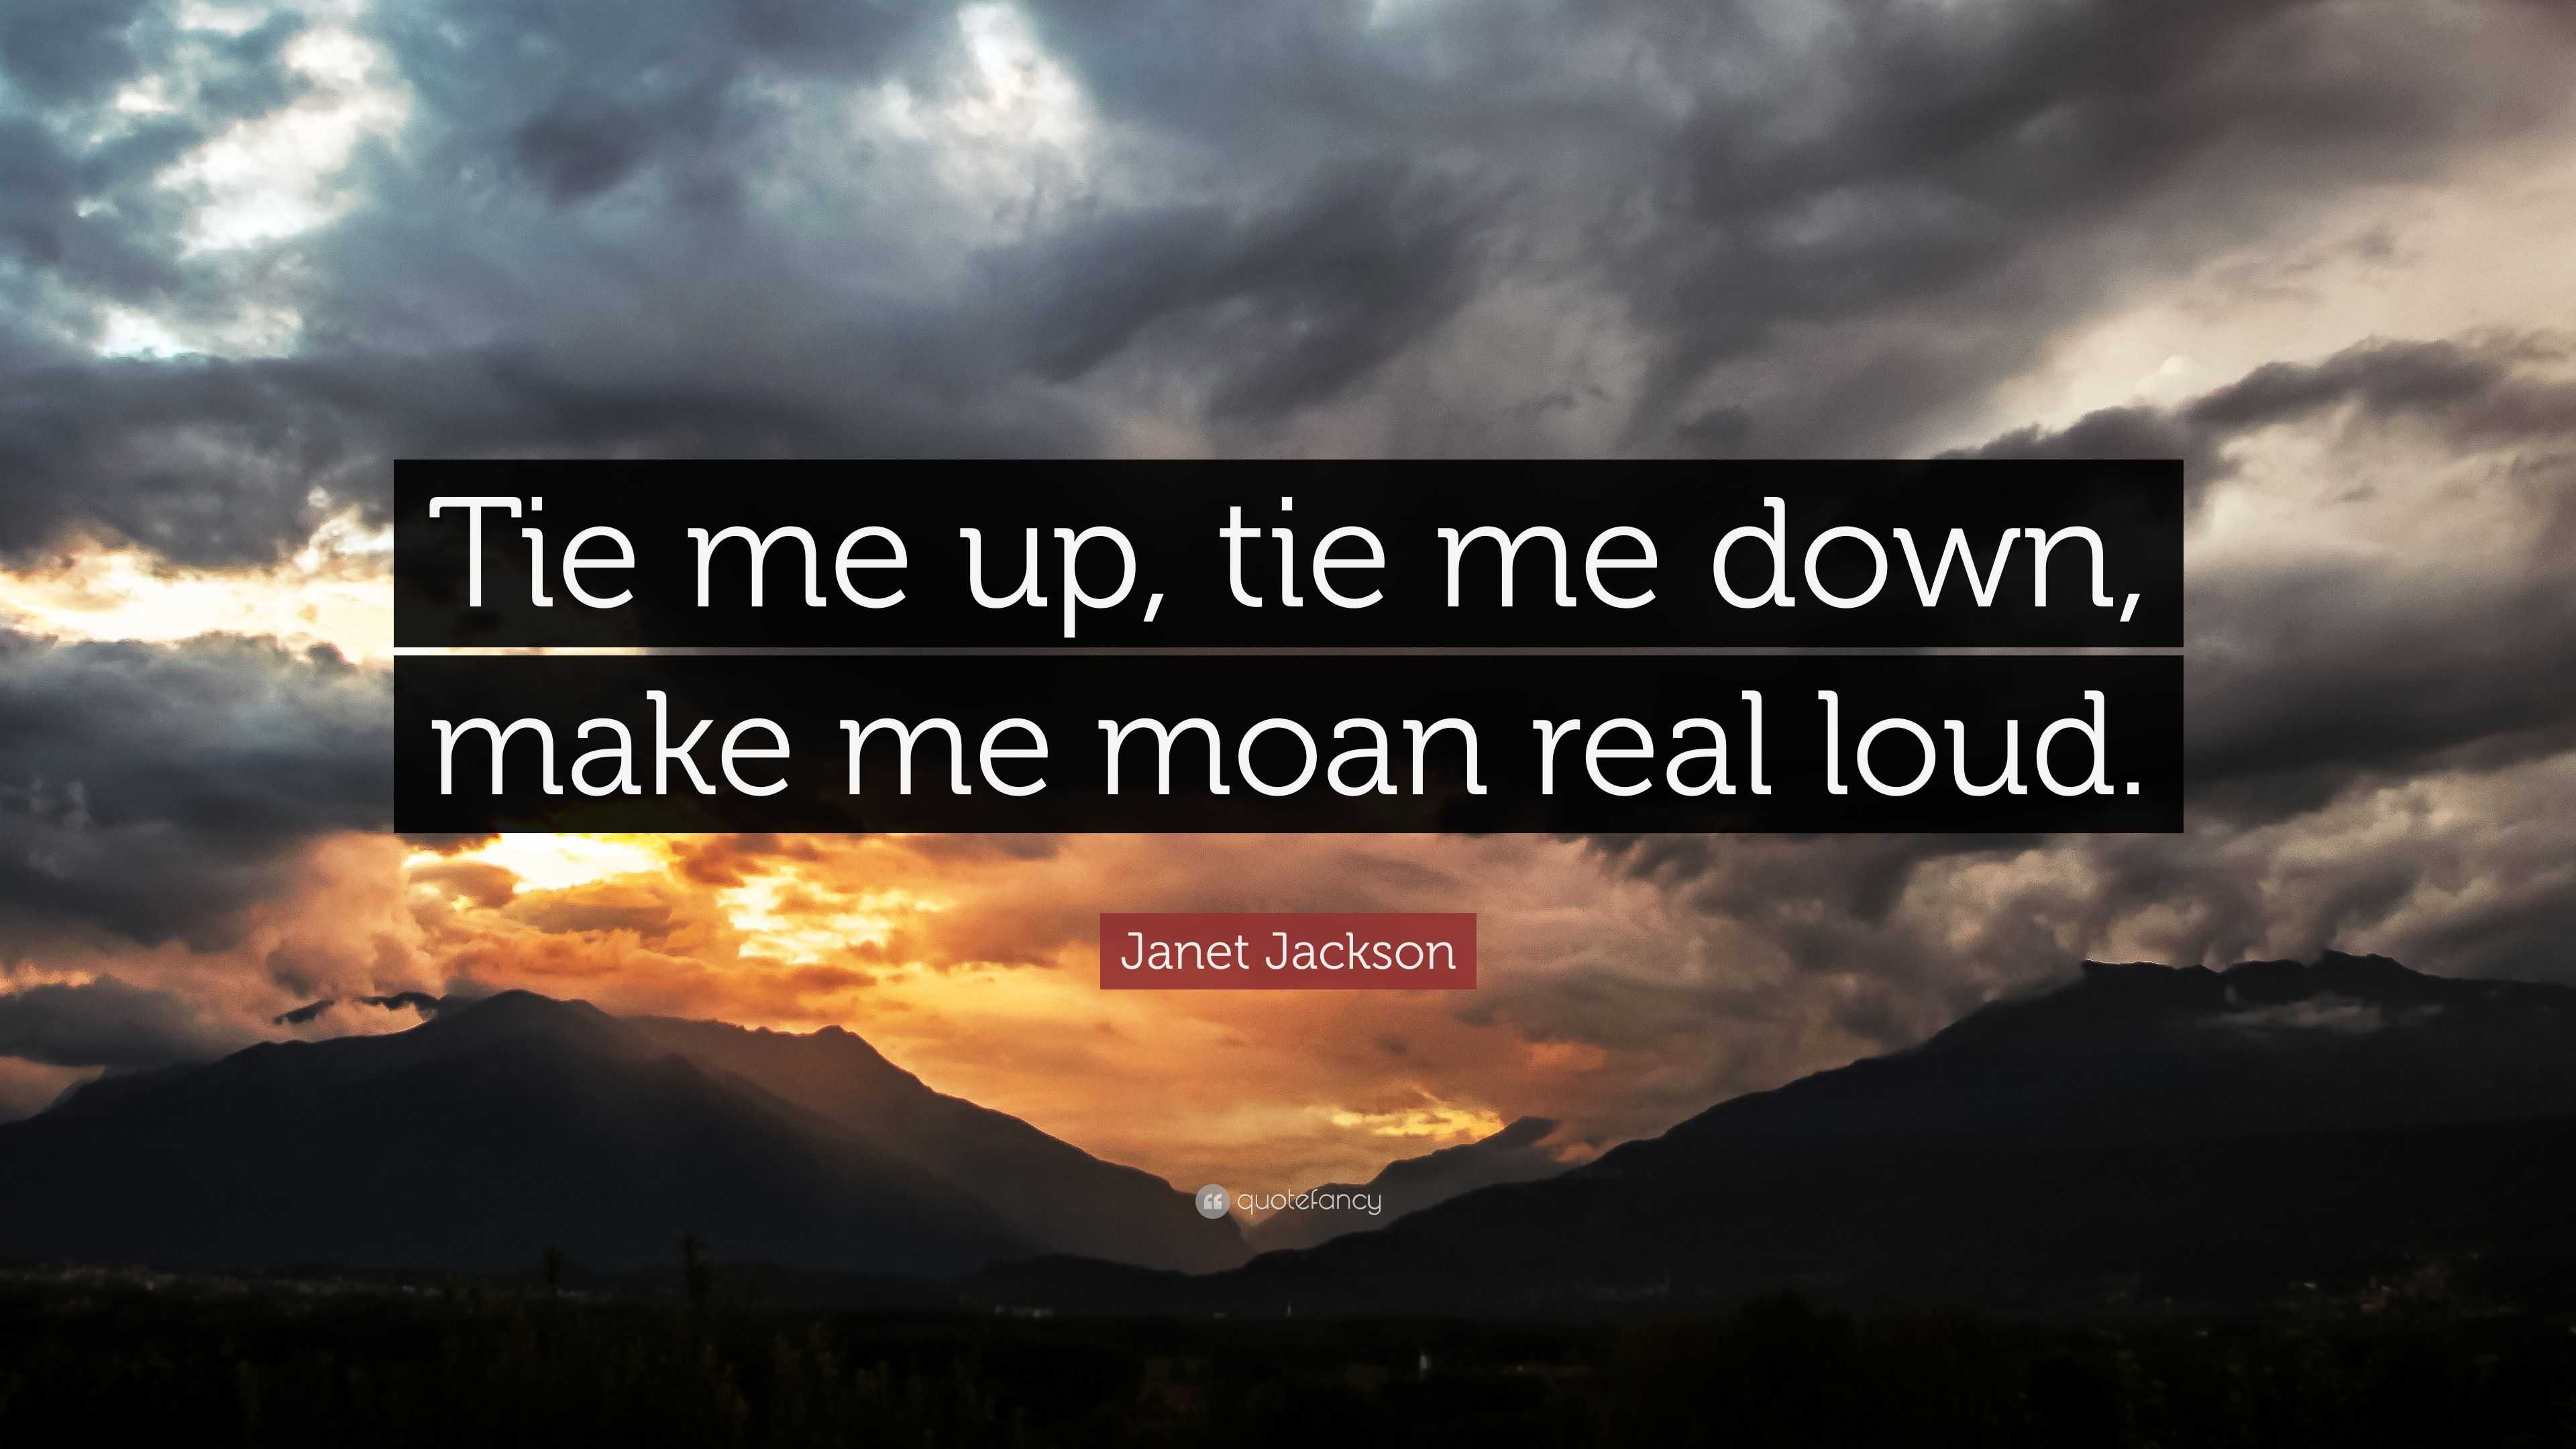 Janet Jackson Quote: “Tie me up, tie me down, make me moan real loud.”